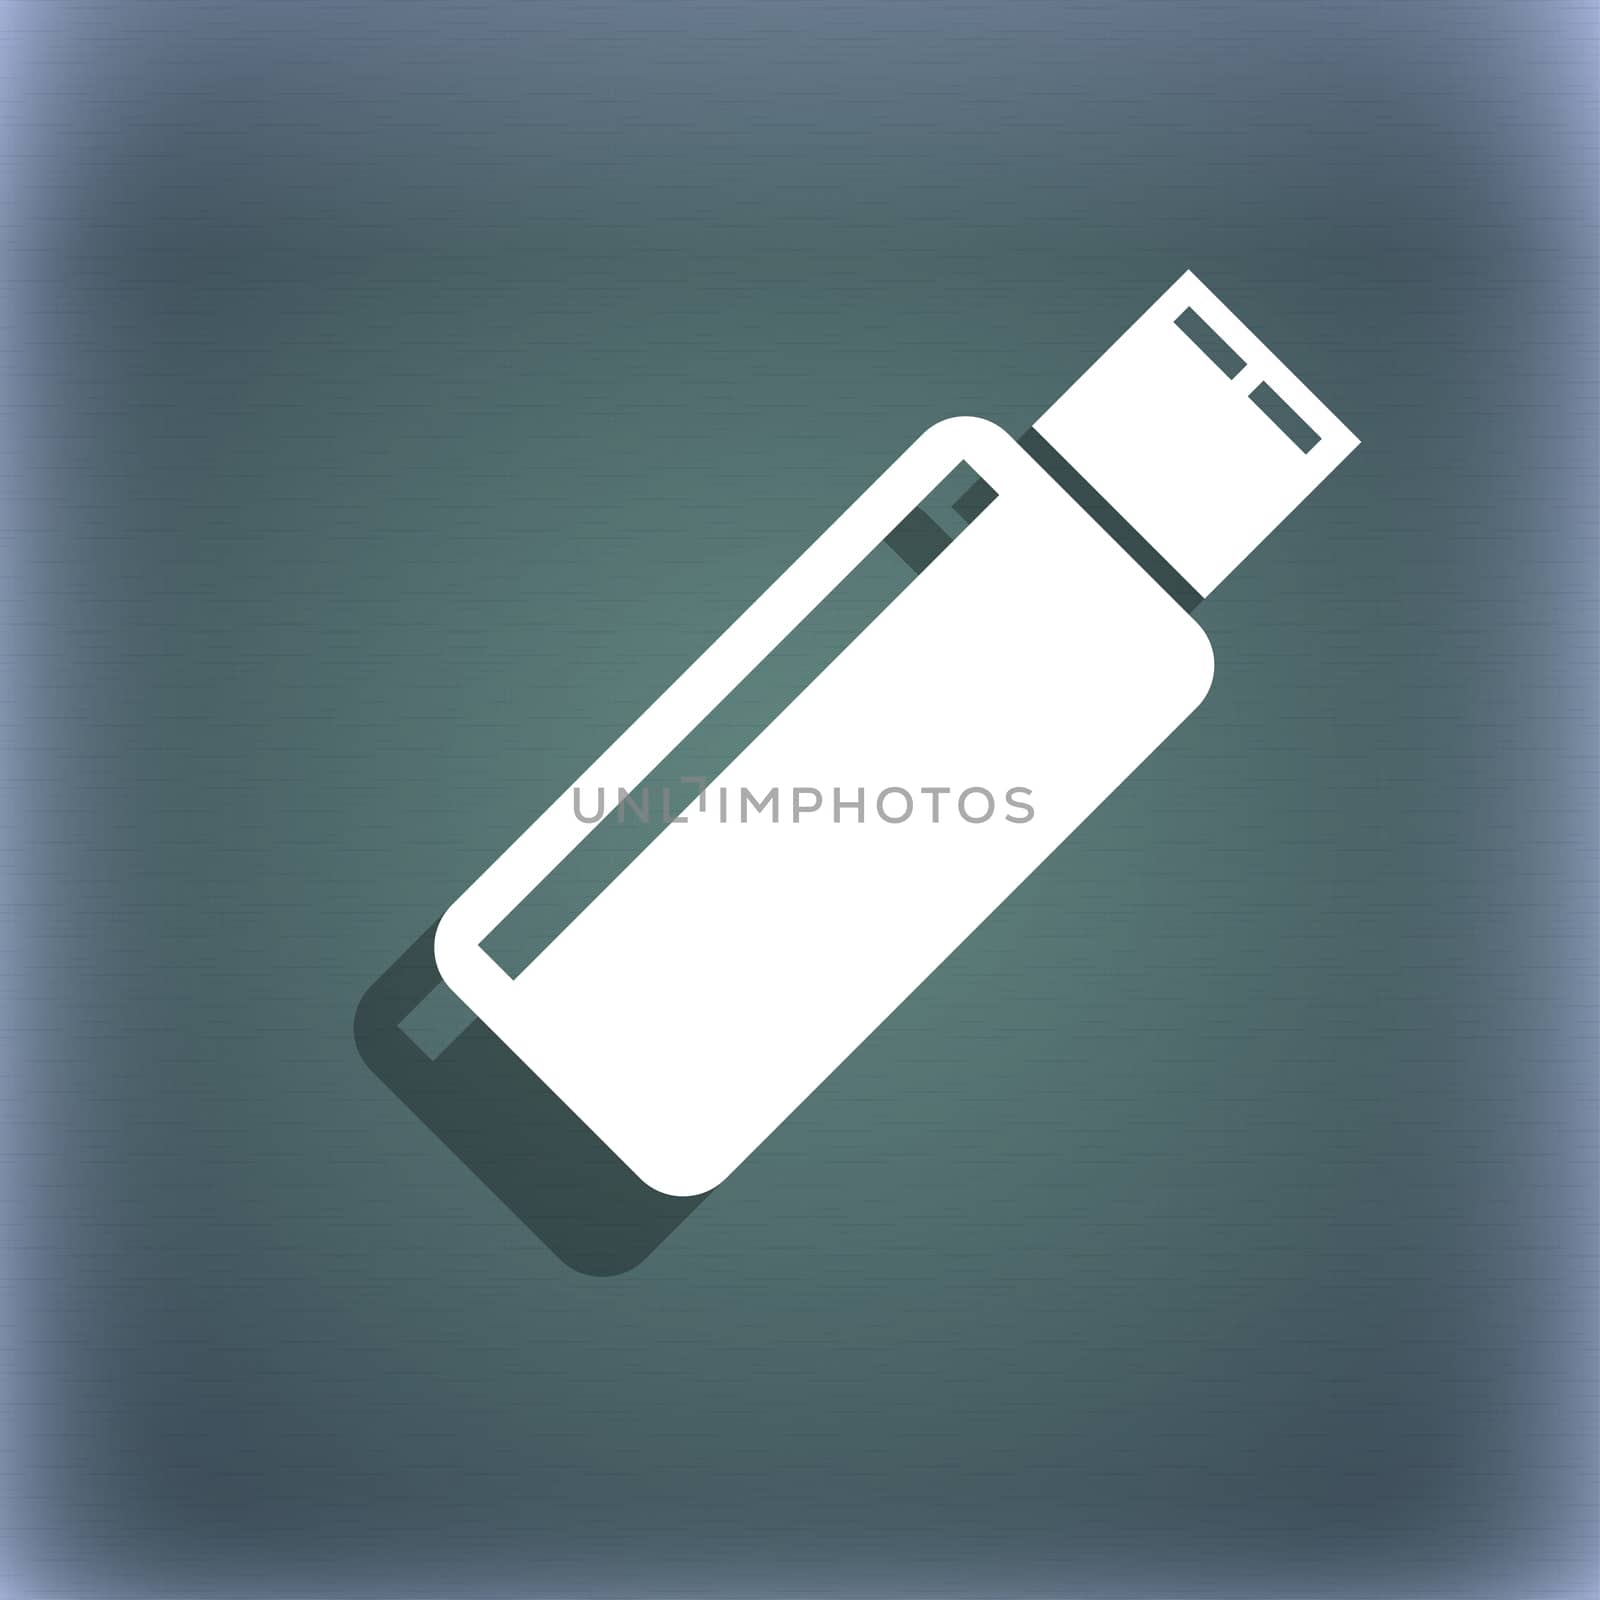 Usb sign icon. Usb flash drive stick symbol. On the blue-green abstract background with shadow and space for your text. illustration